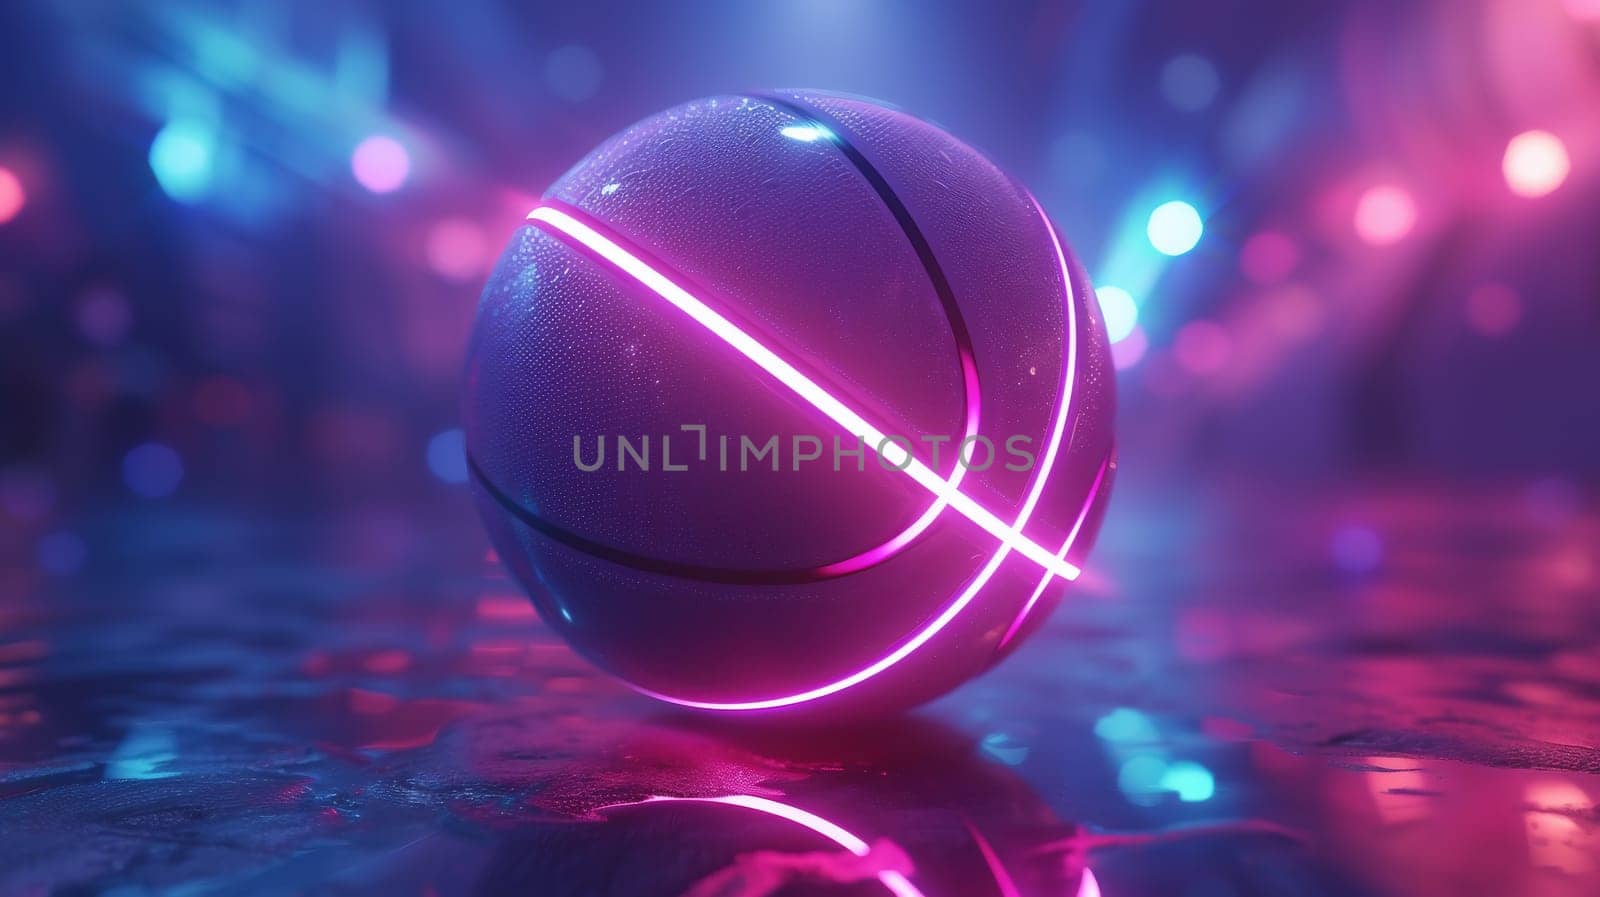 Basketball ball isolated on dark background. Blue neon banner. Horizontal sport theme poster, greeting cards, headers, website and app. High quality photo